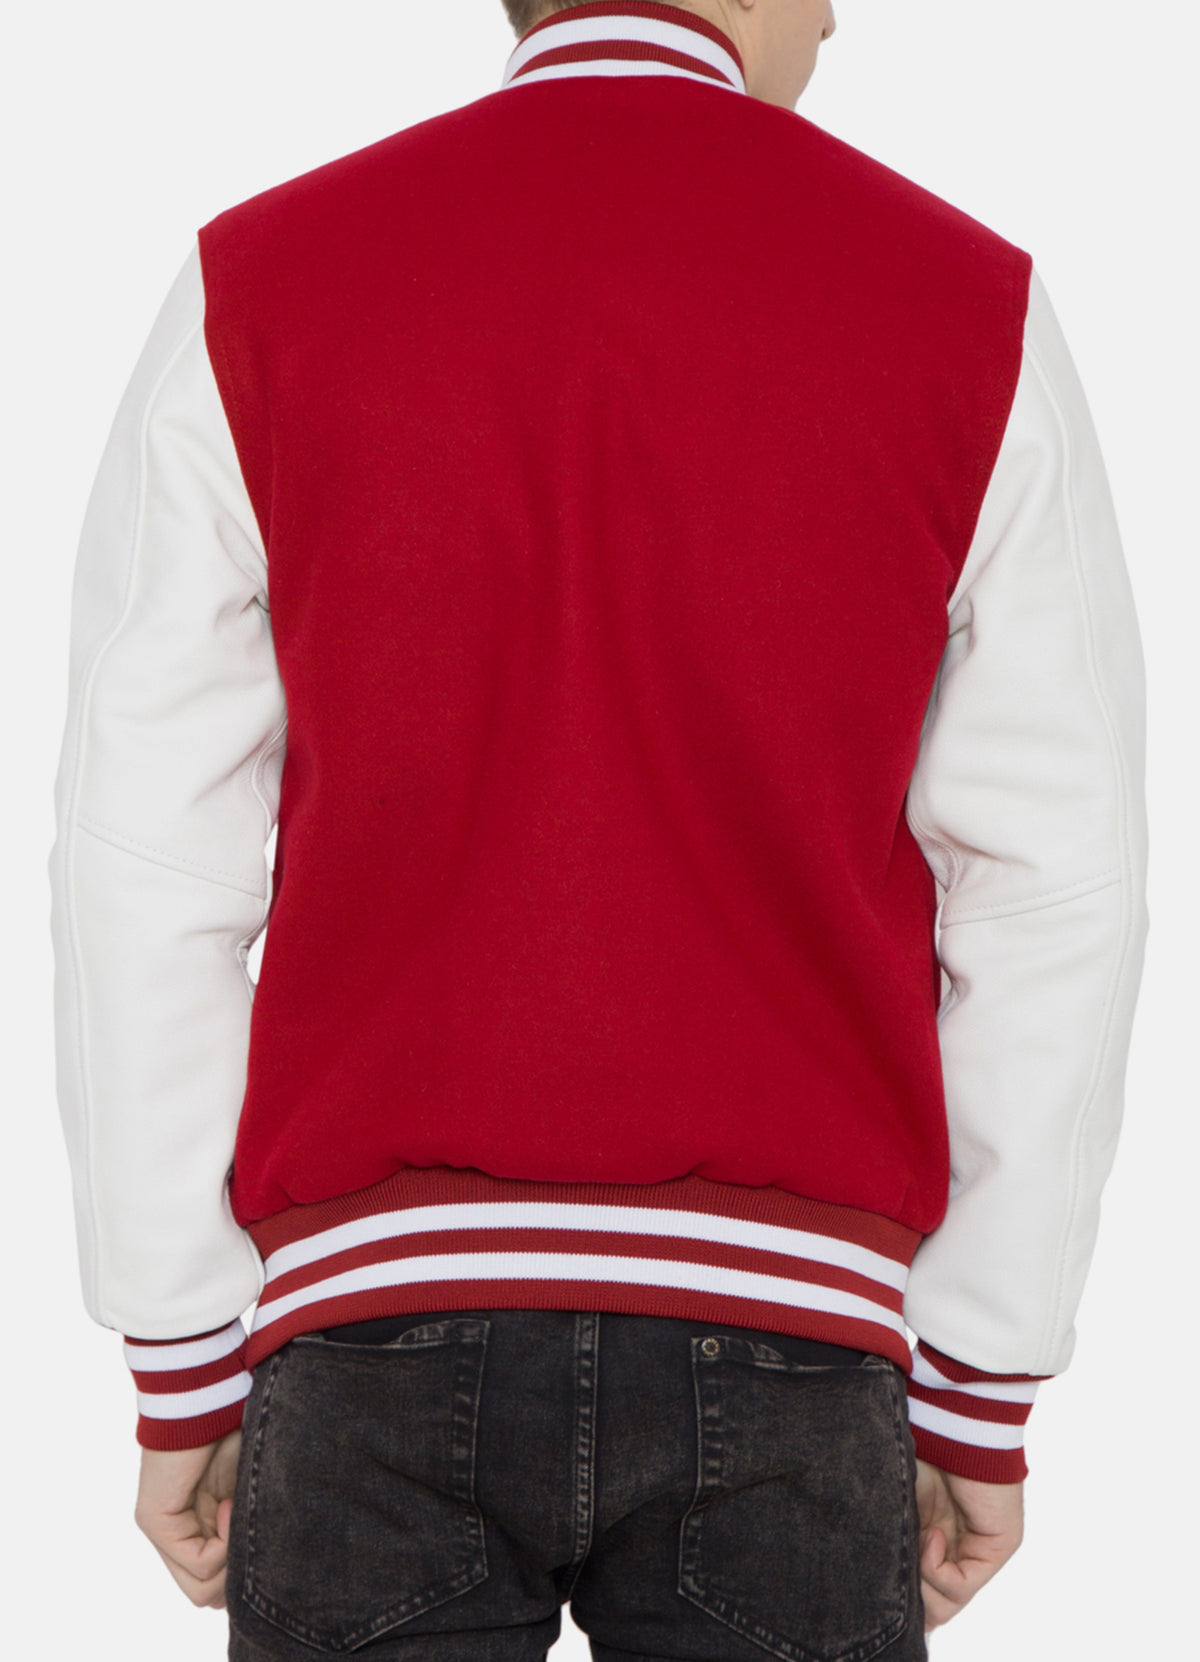 Mens Casual Red and White Varsity Jacket